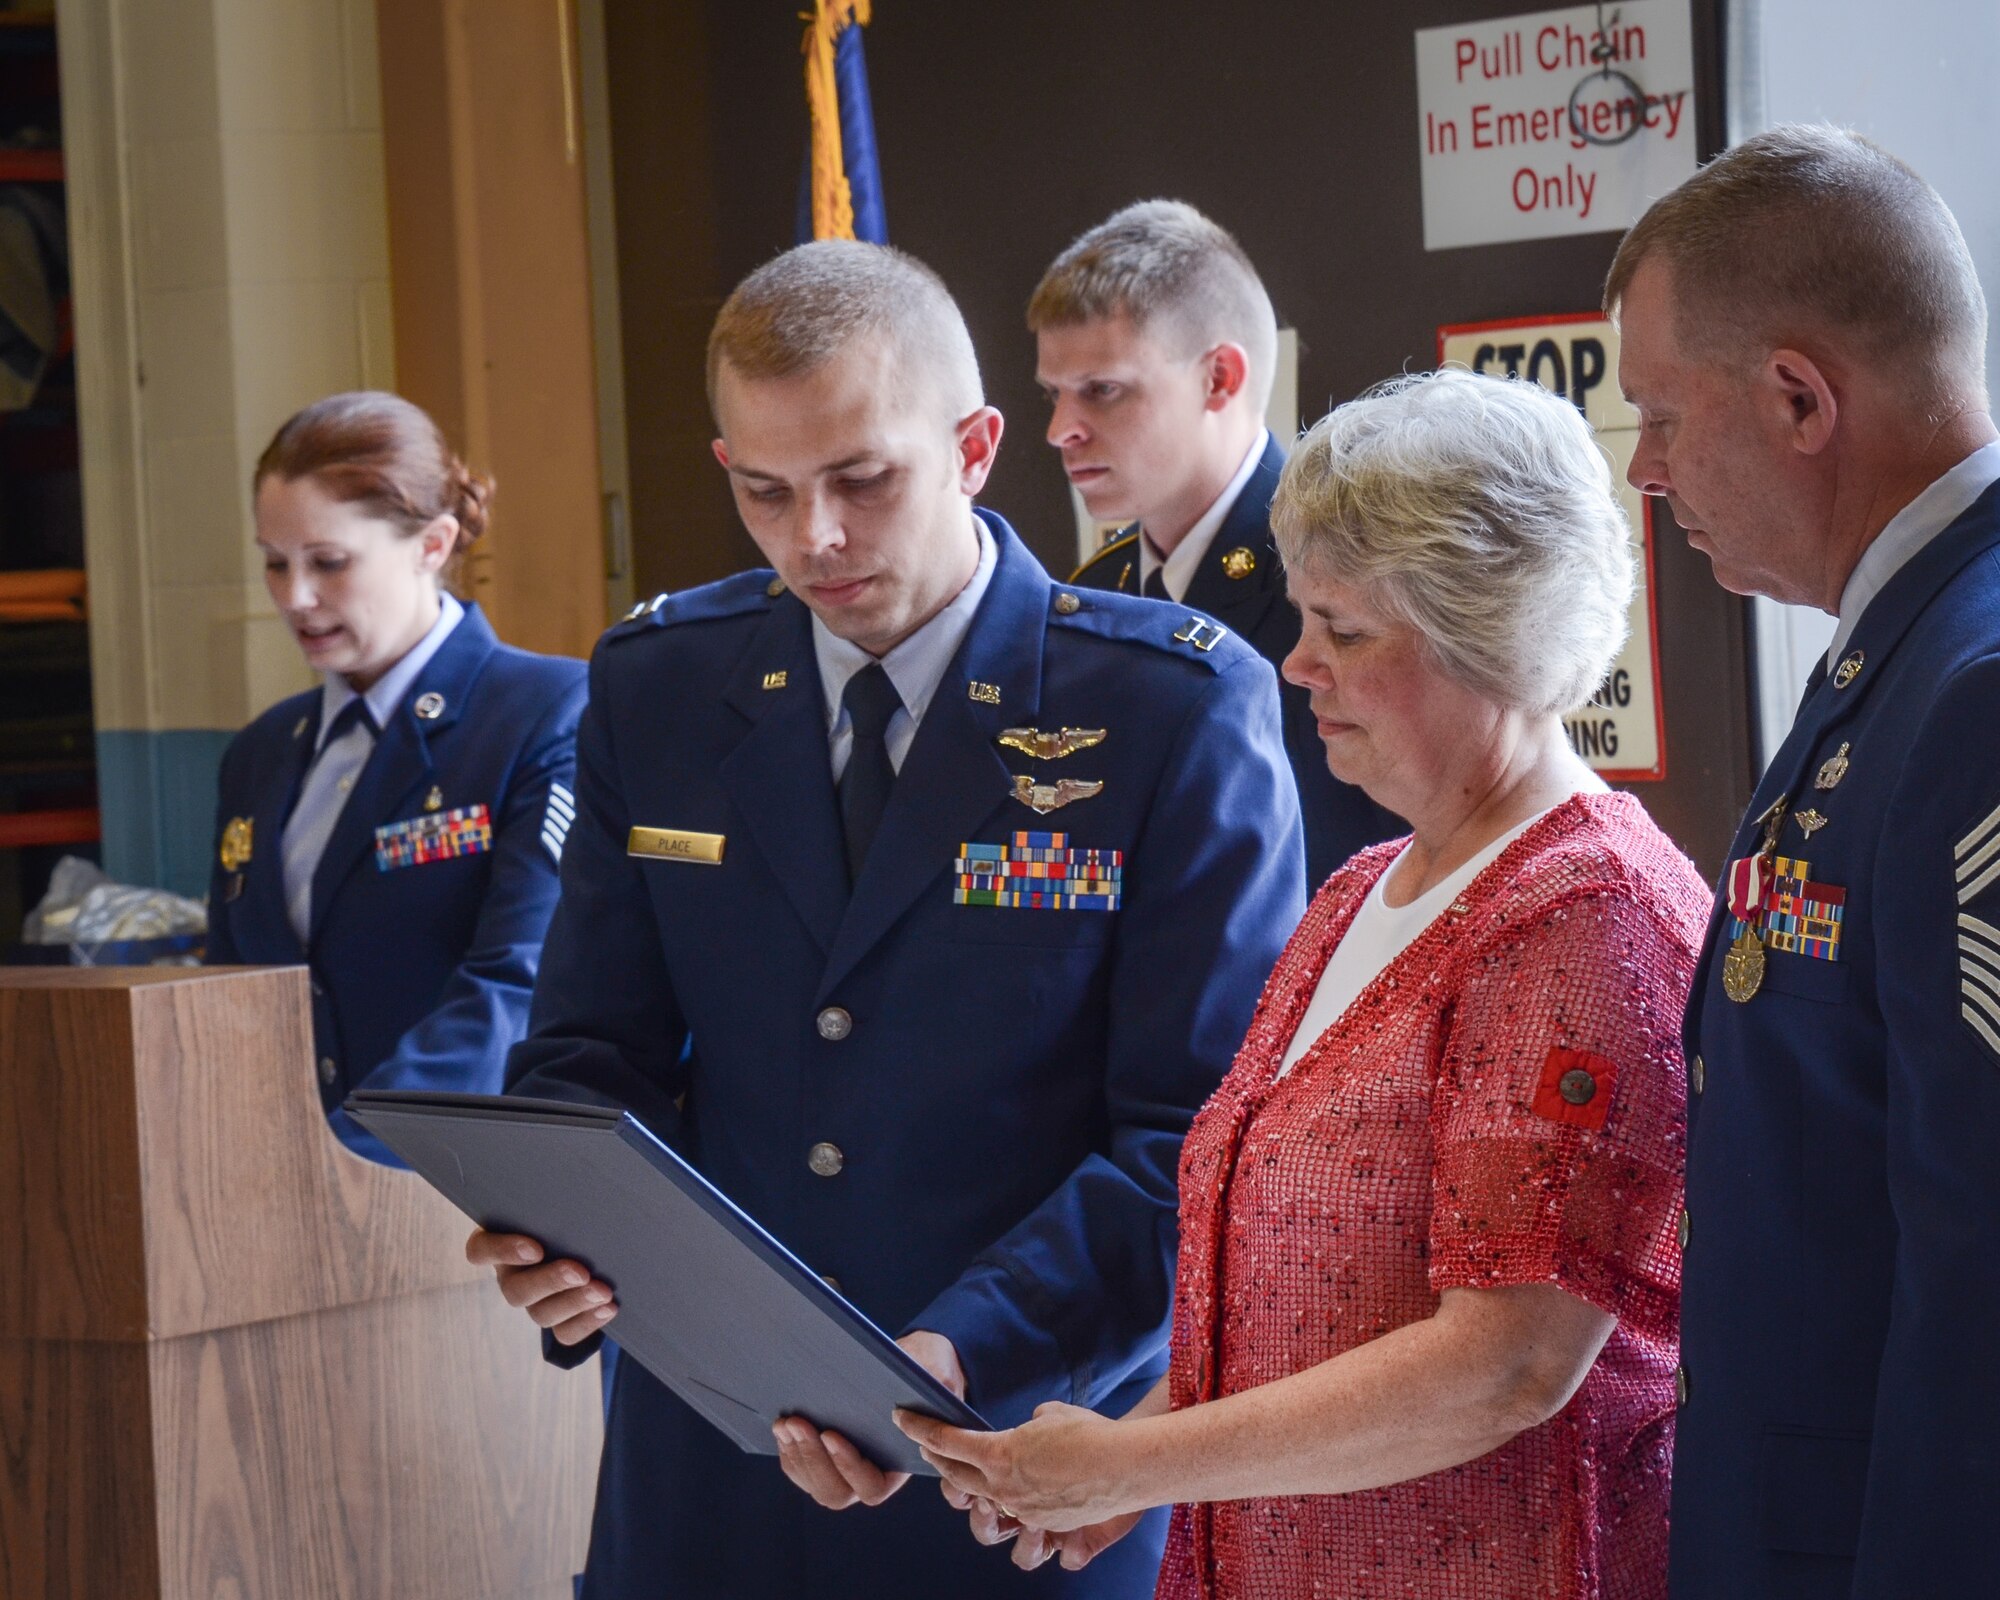 During ceremony, from left to right, the chief's daughter, U.S. Air Force Tech. Sgt. Rebecca Place; his son, USAF Capt. Lee Place; his nephew, Army Sgt. Samuel Cunningham; his wife, Kay Place; and Chief Master Sgt. Dale Place. (Air Force Photo/Master Sgt. Eric Amidon)